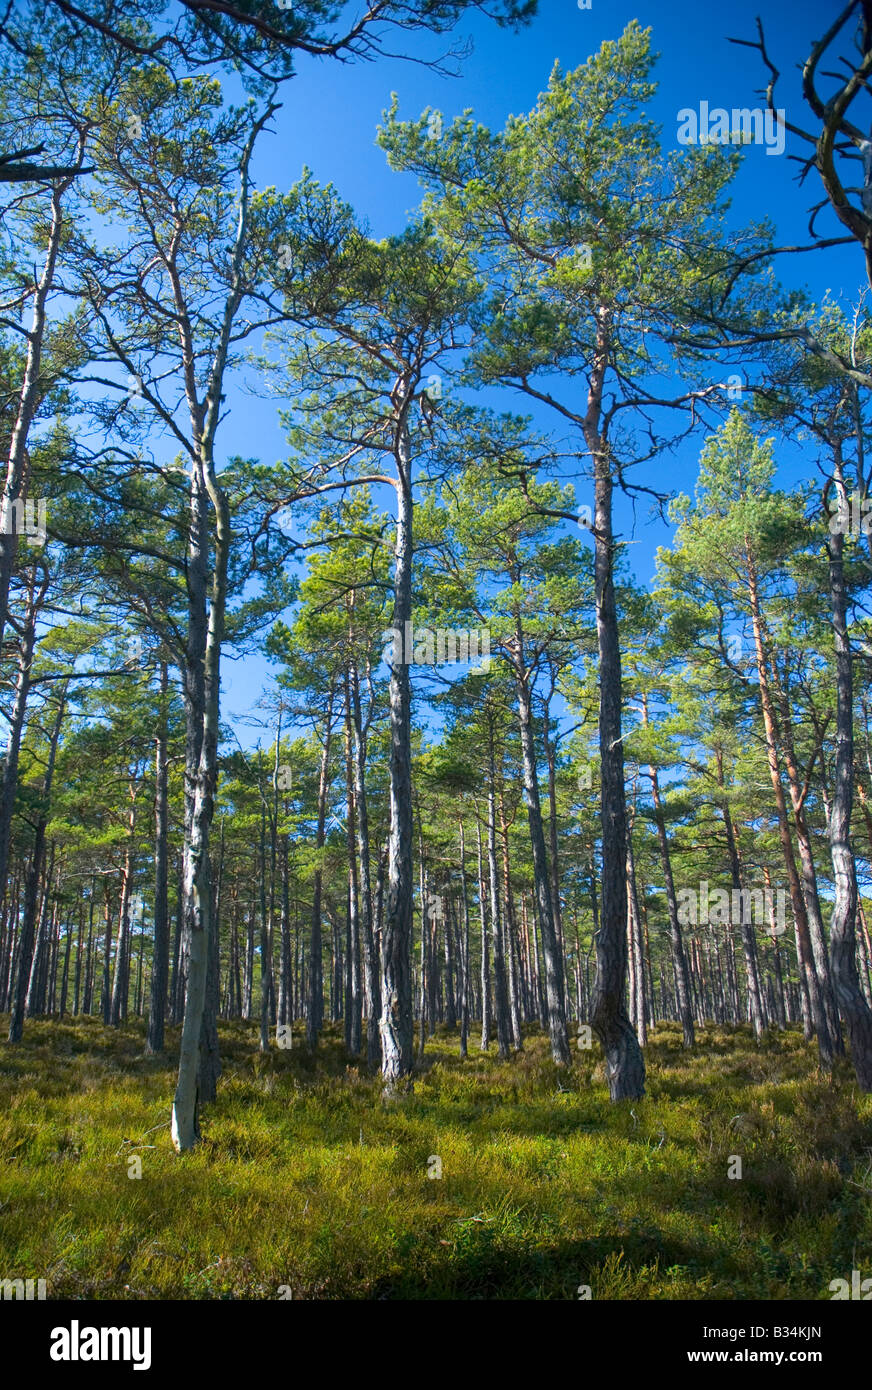 Forest mainly consisting of pine trees (Scots pine) on Sandhamn/Sandön island in the archipelago of Stockholm, Sweden. Stock Photo